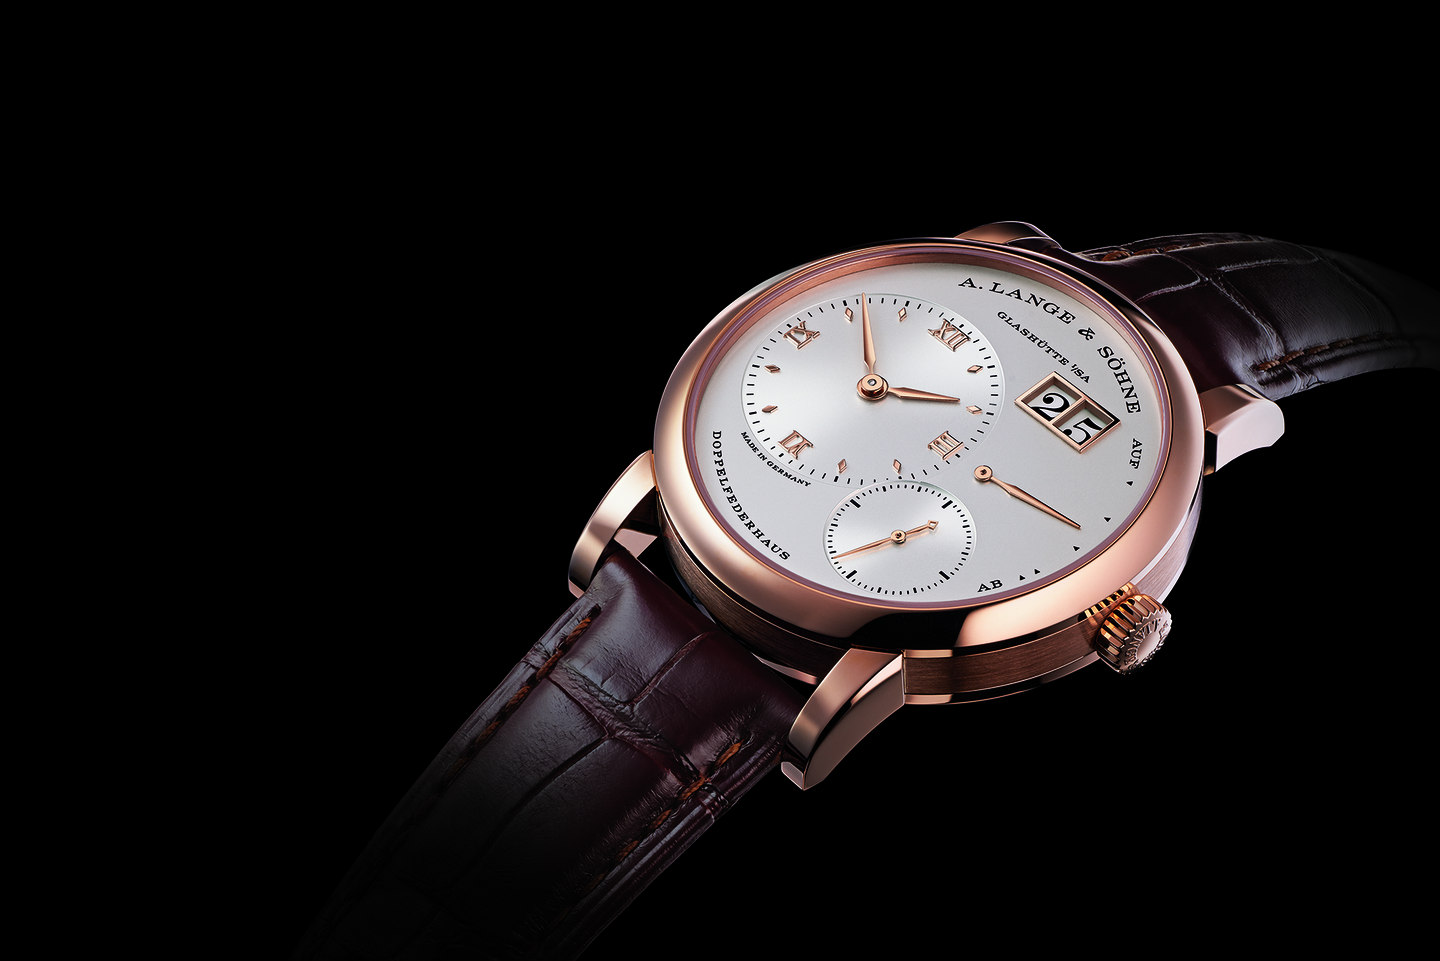 Introducing the new Lange 1